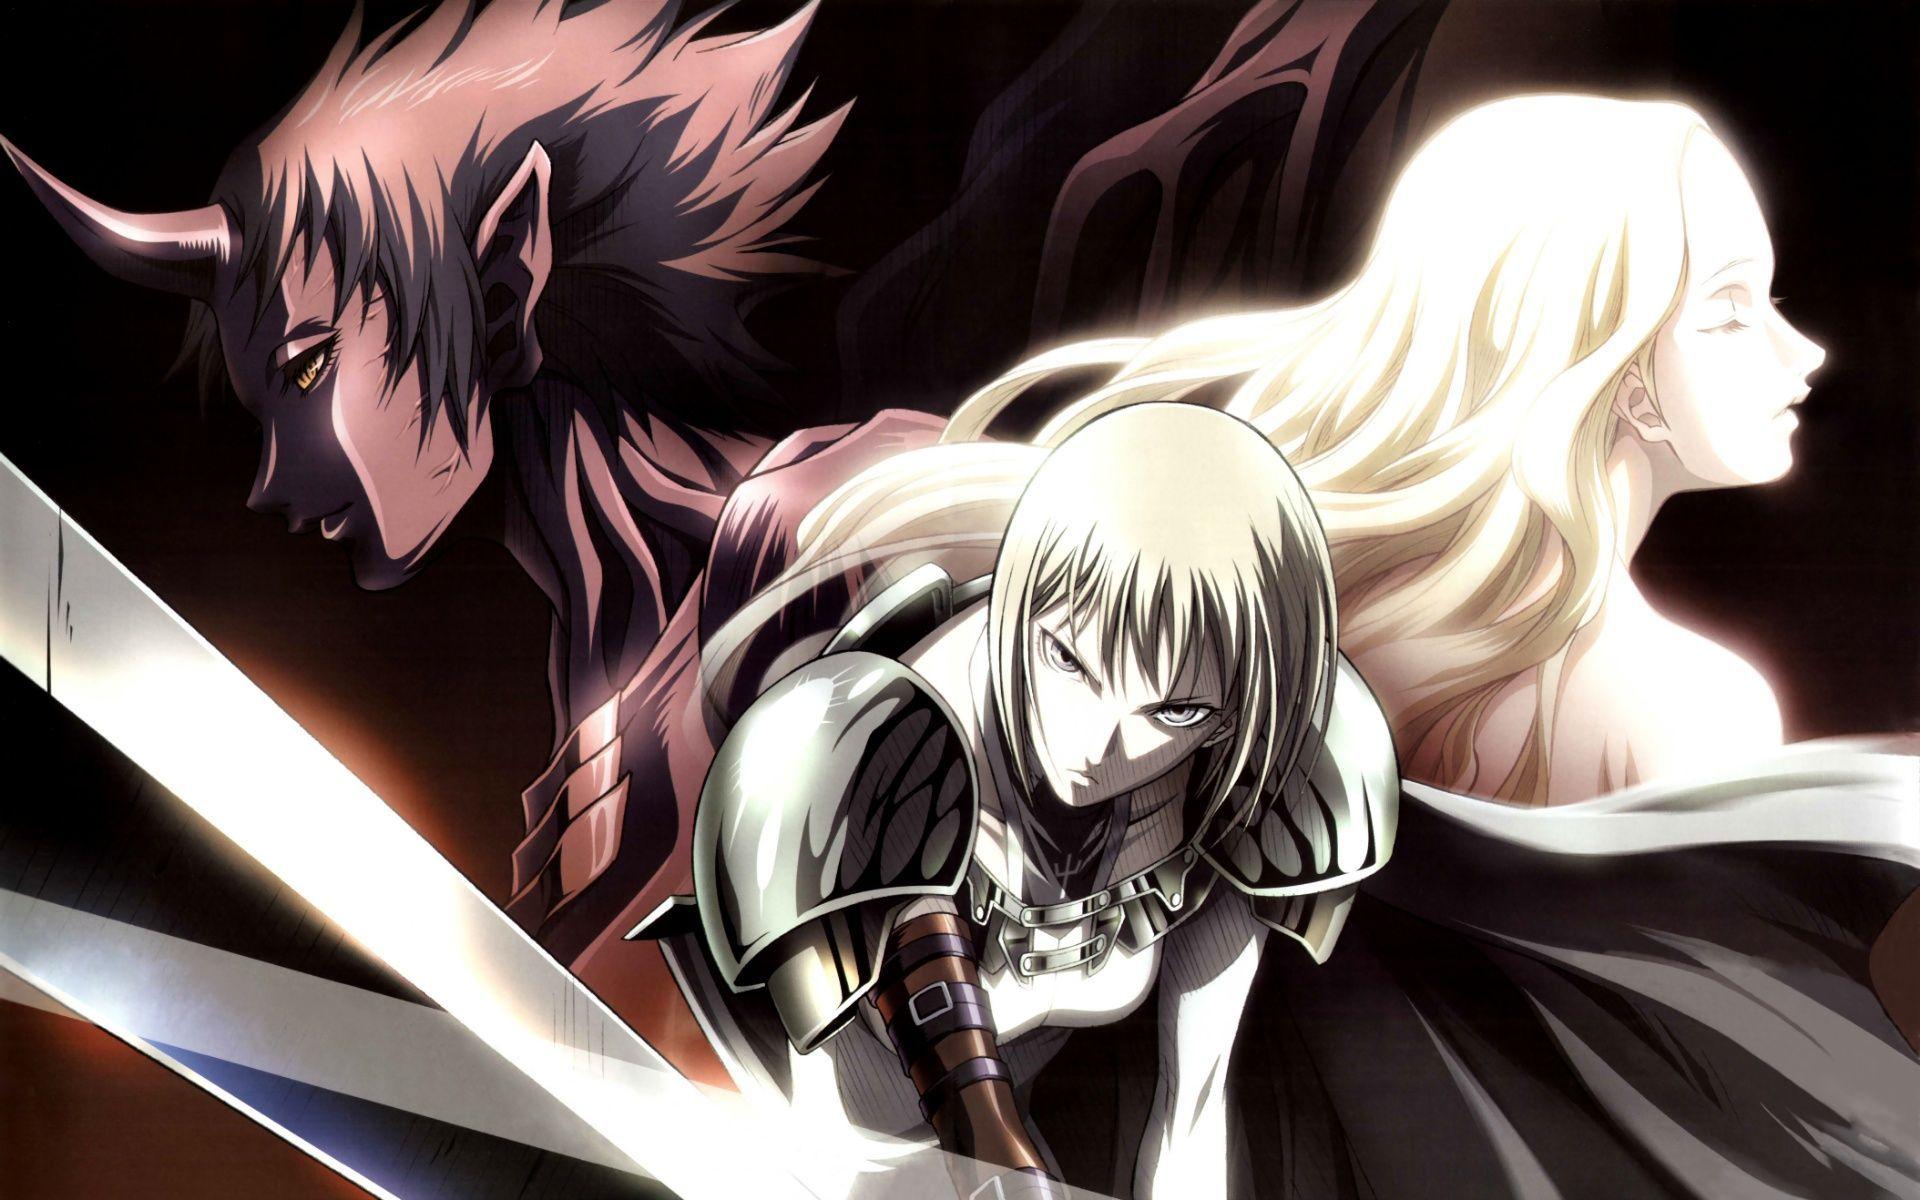 Again Claymore but the 3 protagonist :D. Claymore